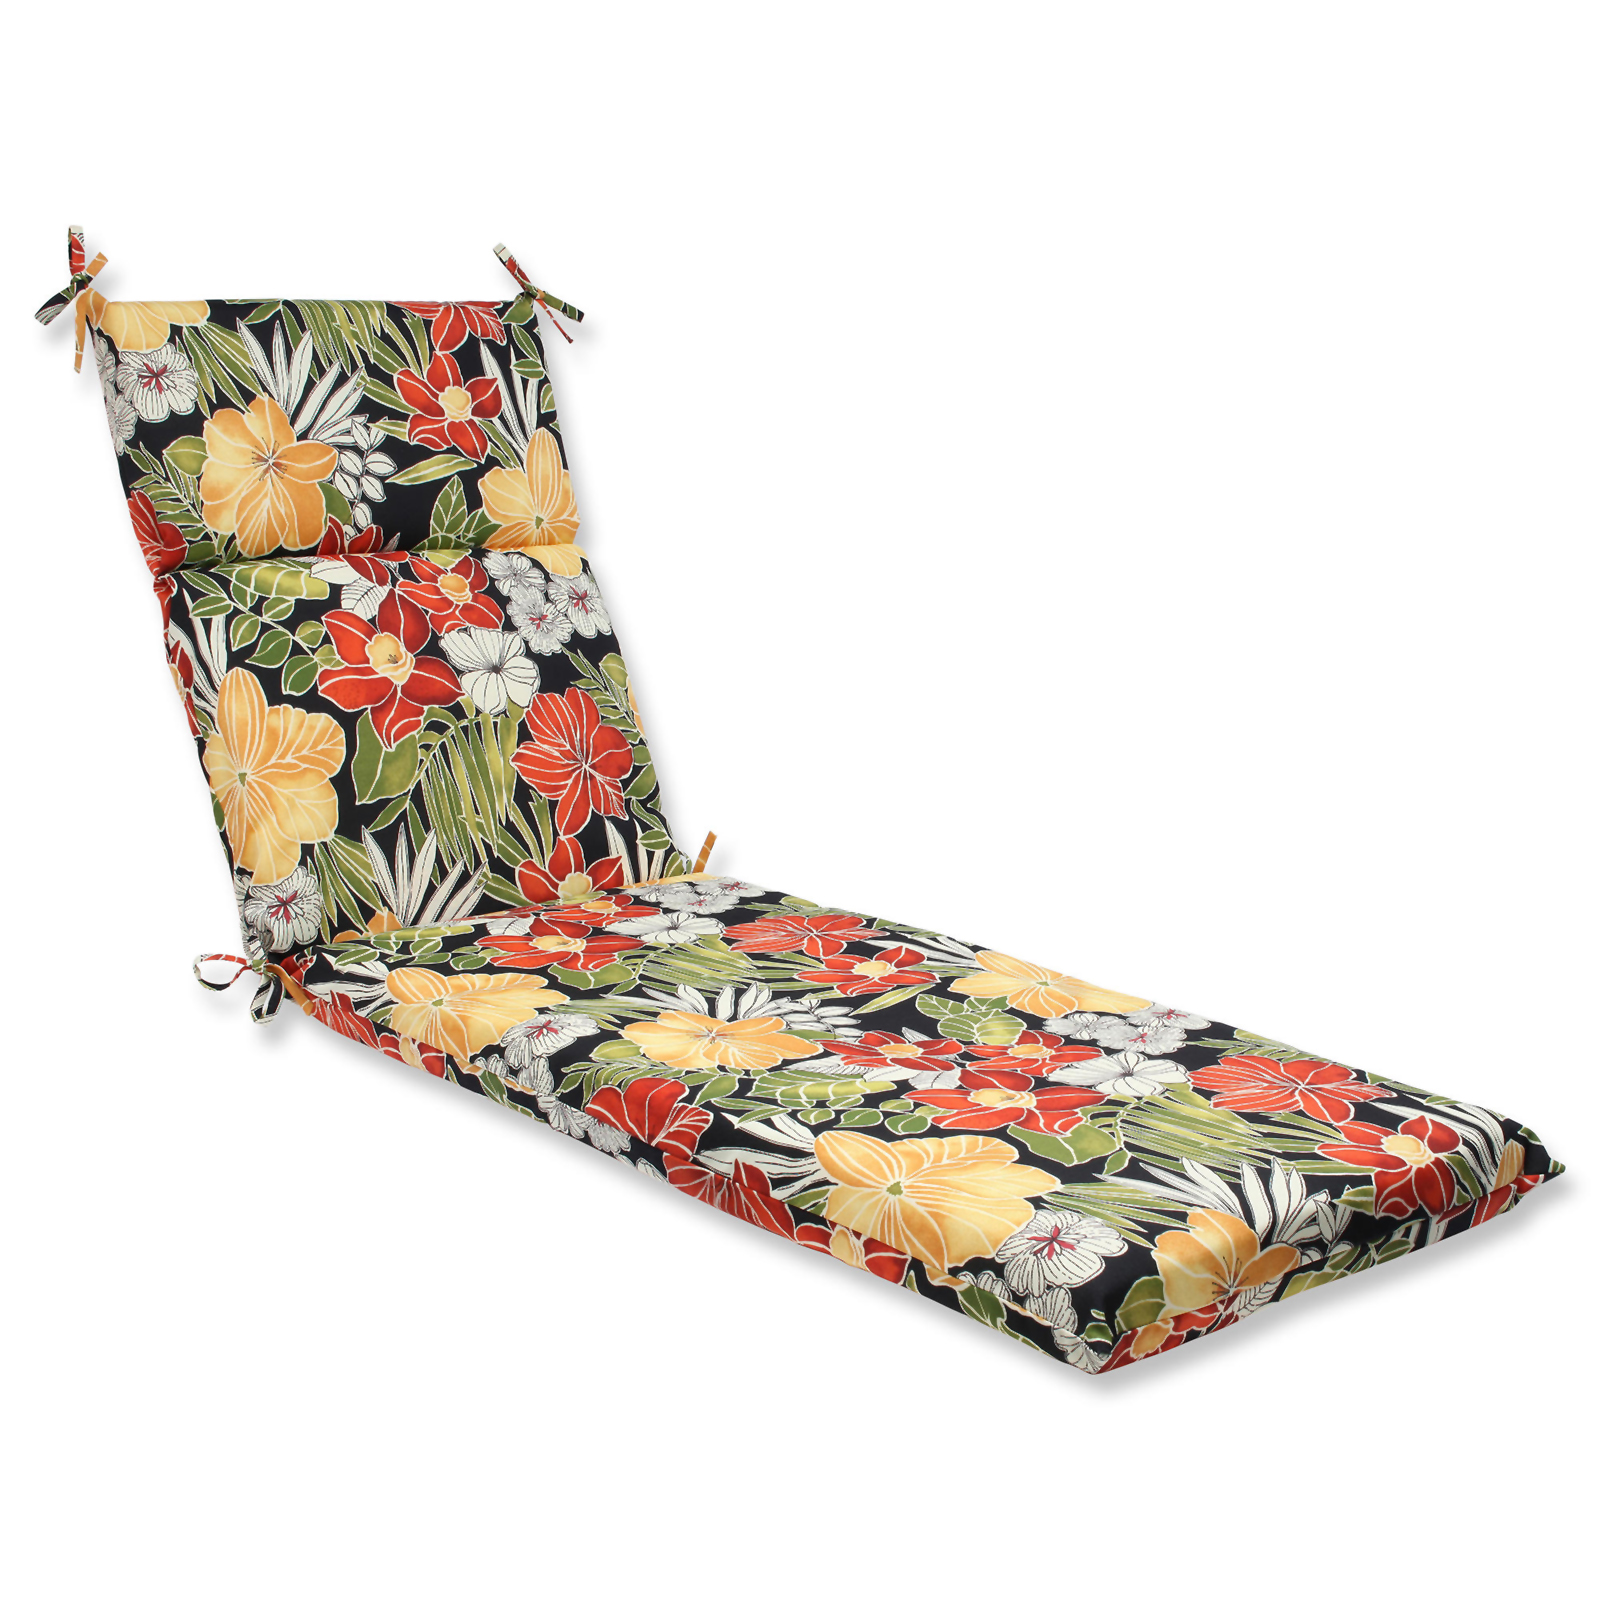 Pillow Perfect Clemens Noir Polyester Outdoor Chaise Lounge Cushion - Multicolor